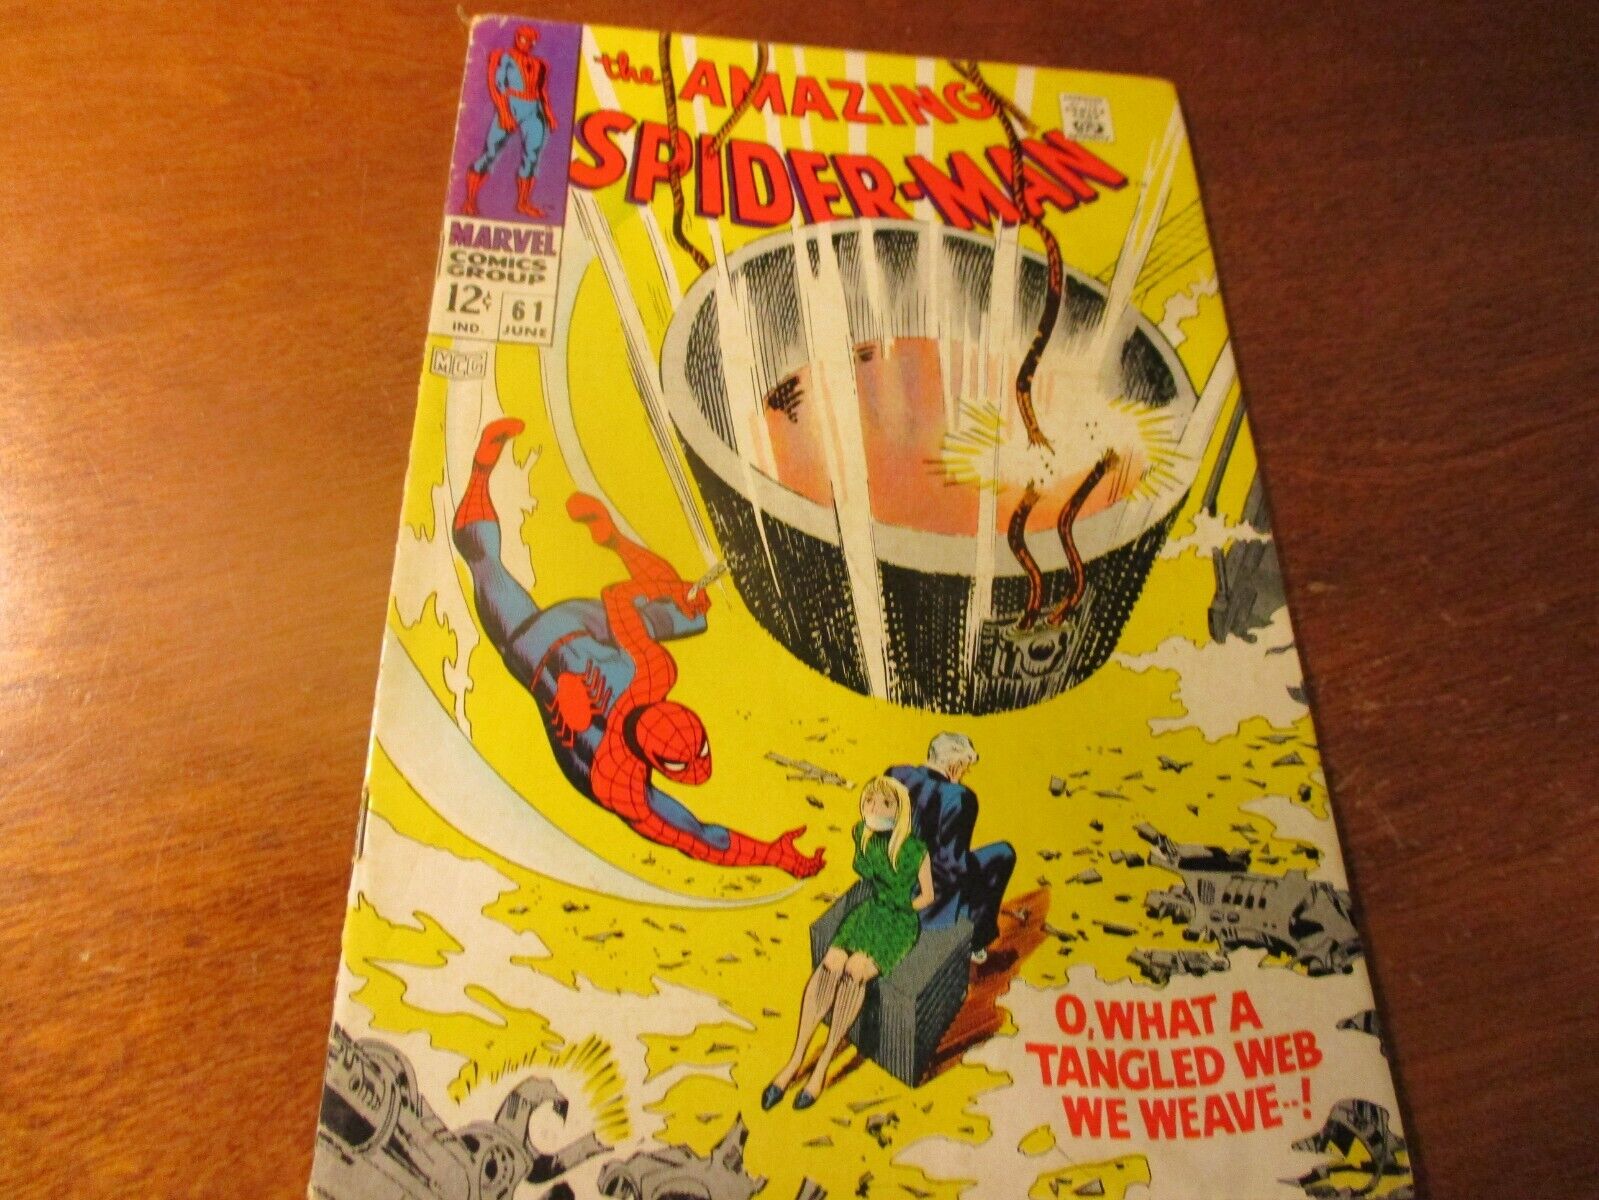 The Amazing Spider-Man #61 (1963) in VG+/Ex complete condition - Grade ready